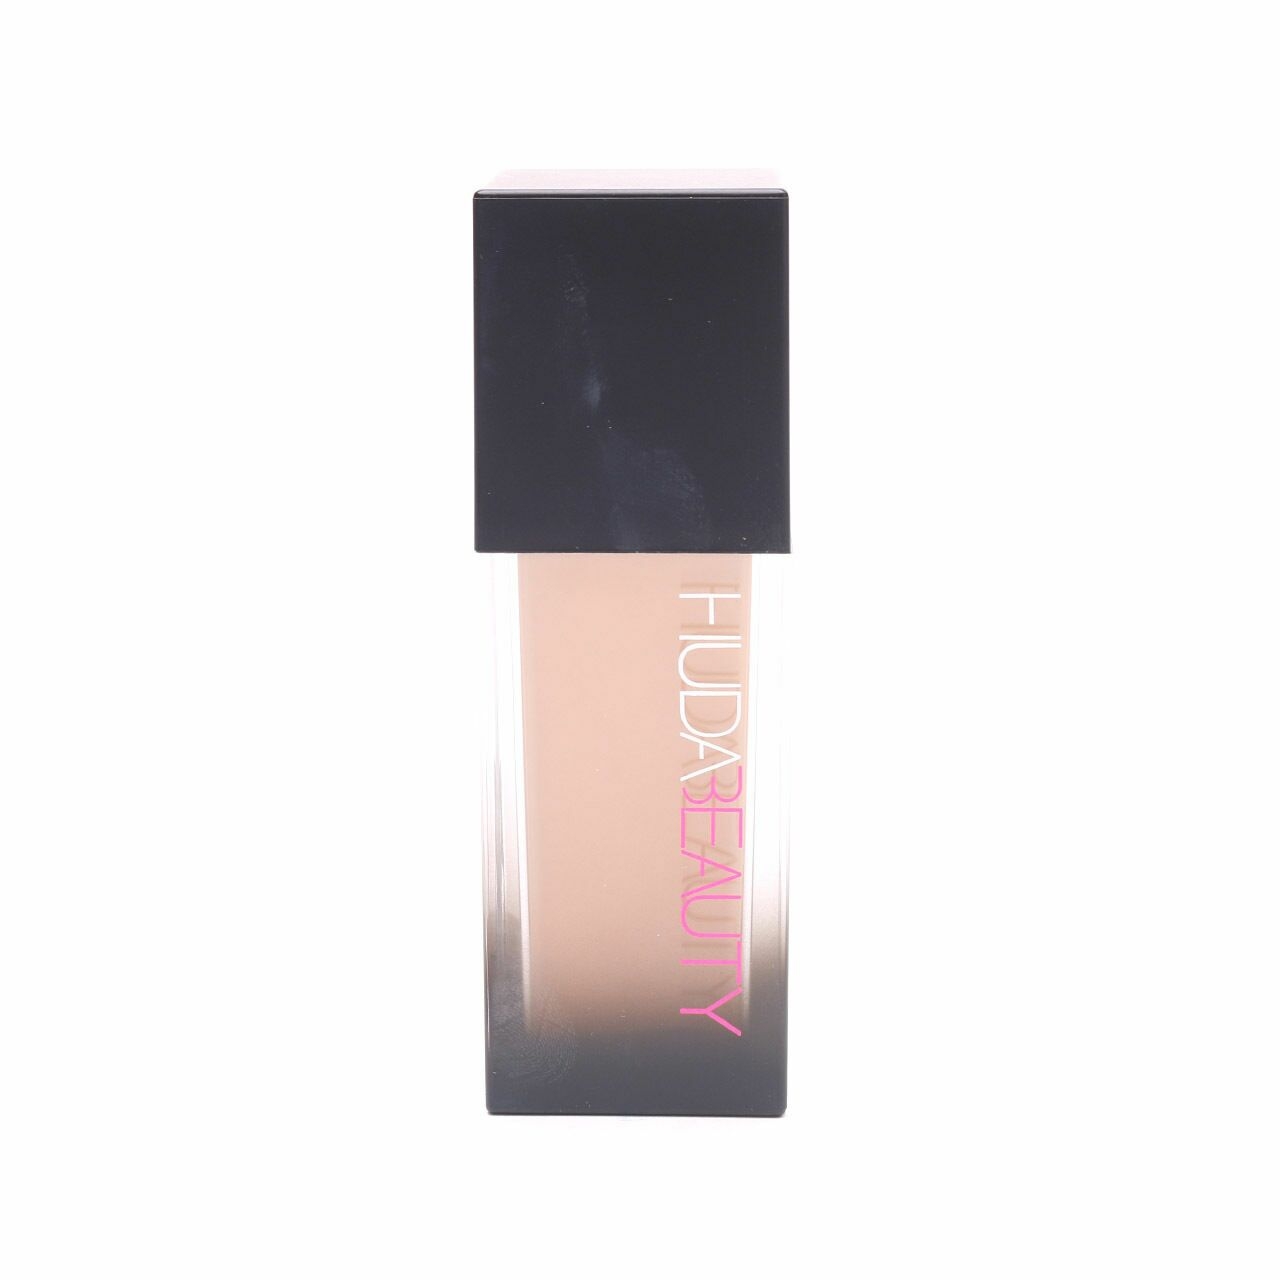 Huda Beauty Faux Filter High Coverage Cream Foundation #Latte 300N Faces